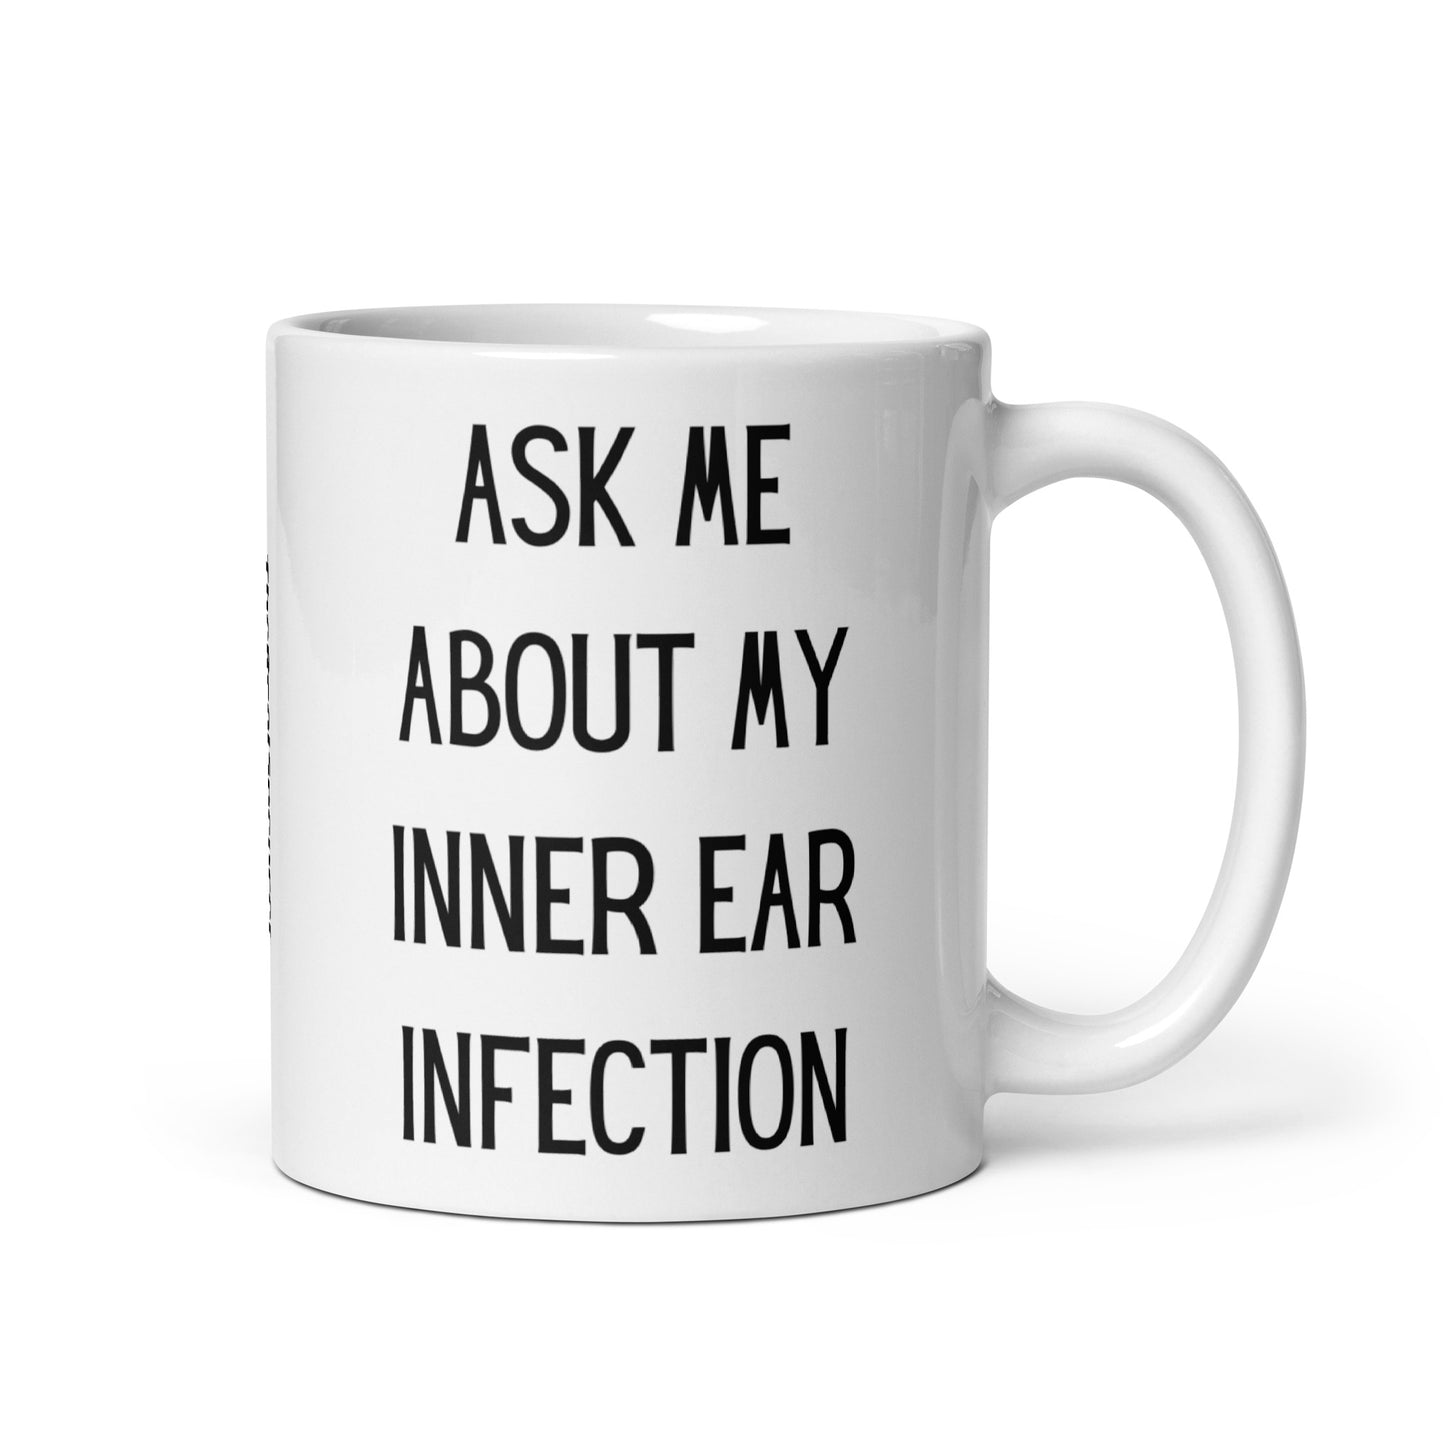 Ask Me About My Inner Ear Infection Mug